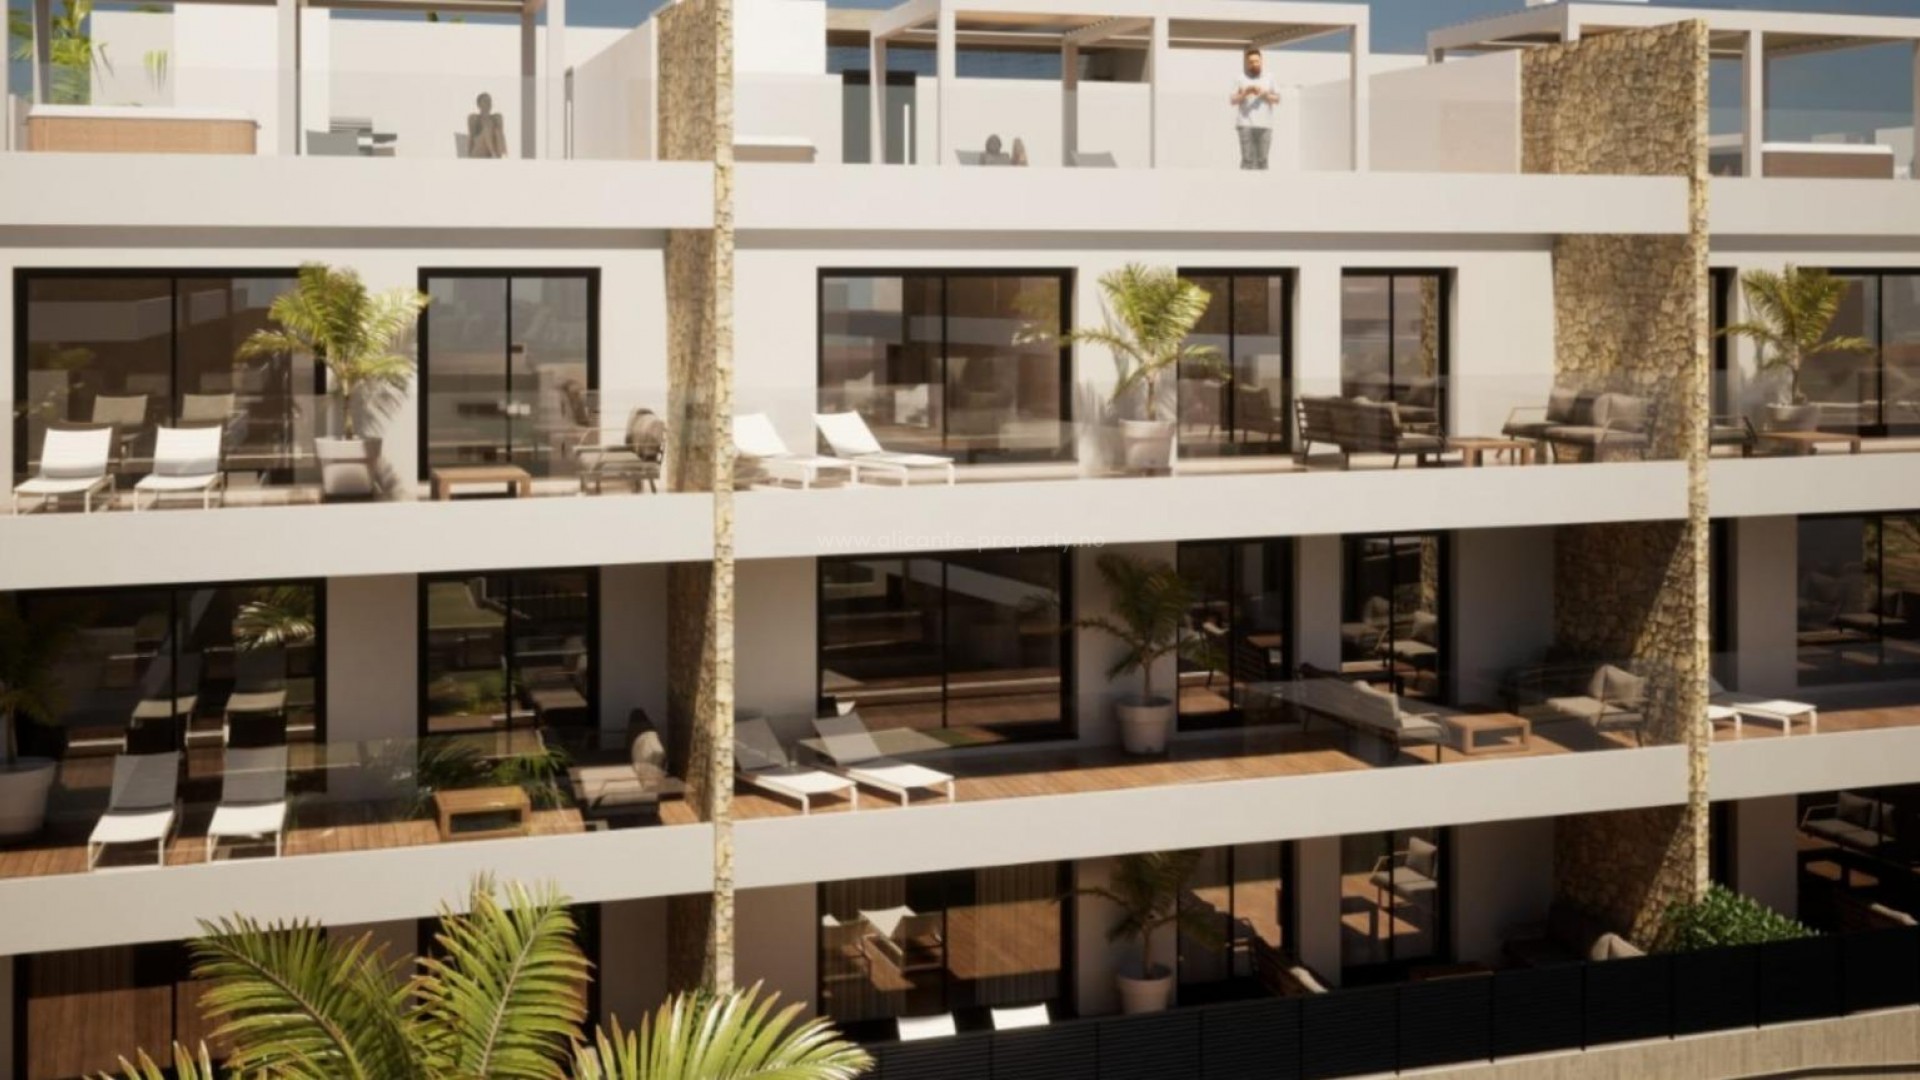 New built flats/apartment complex with sea view in Finestrat near Benidorm, 3 different types of housing, apartments/penthouses. Nice common areas w/pool